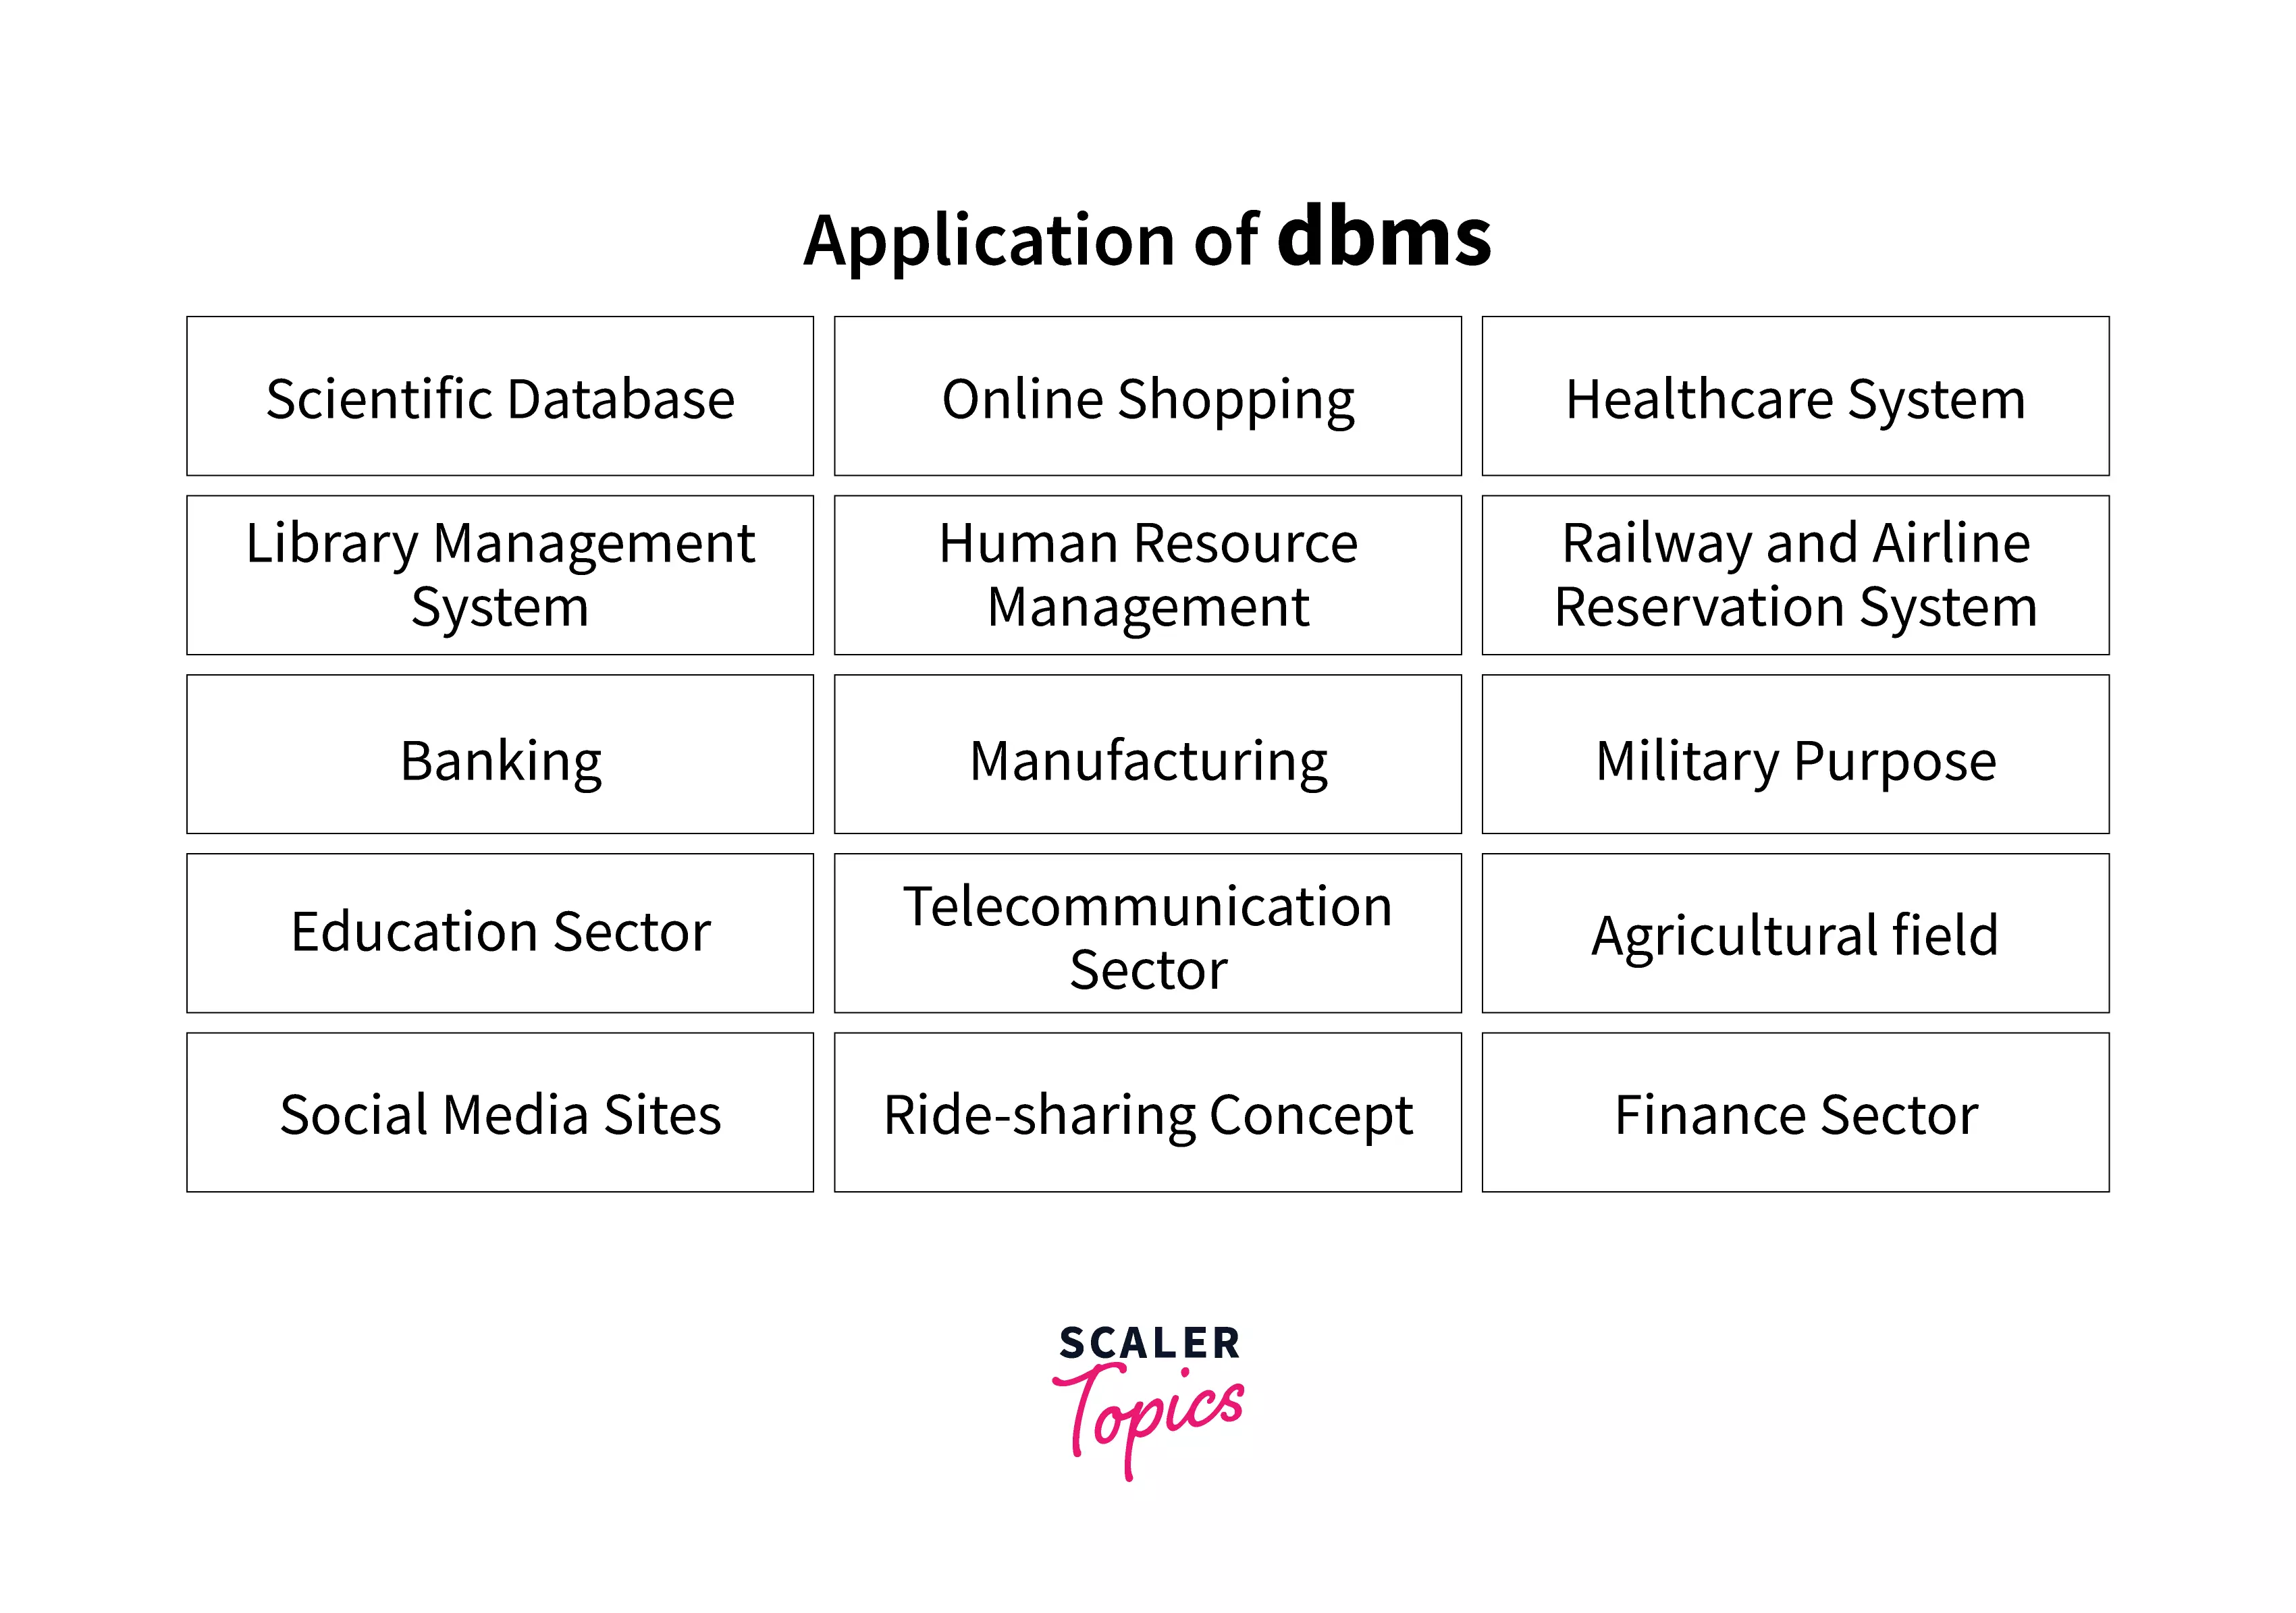 APPLICATION OF DBMS